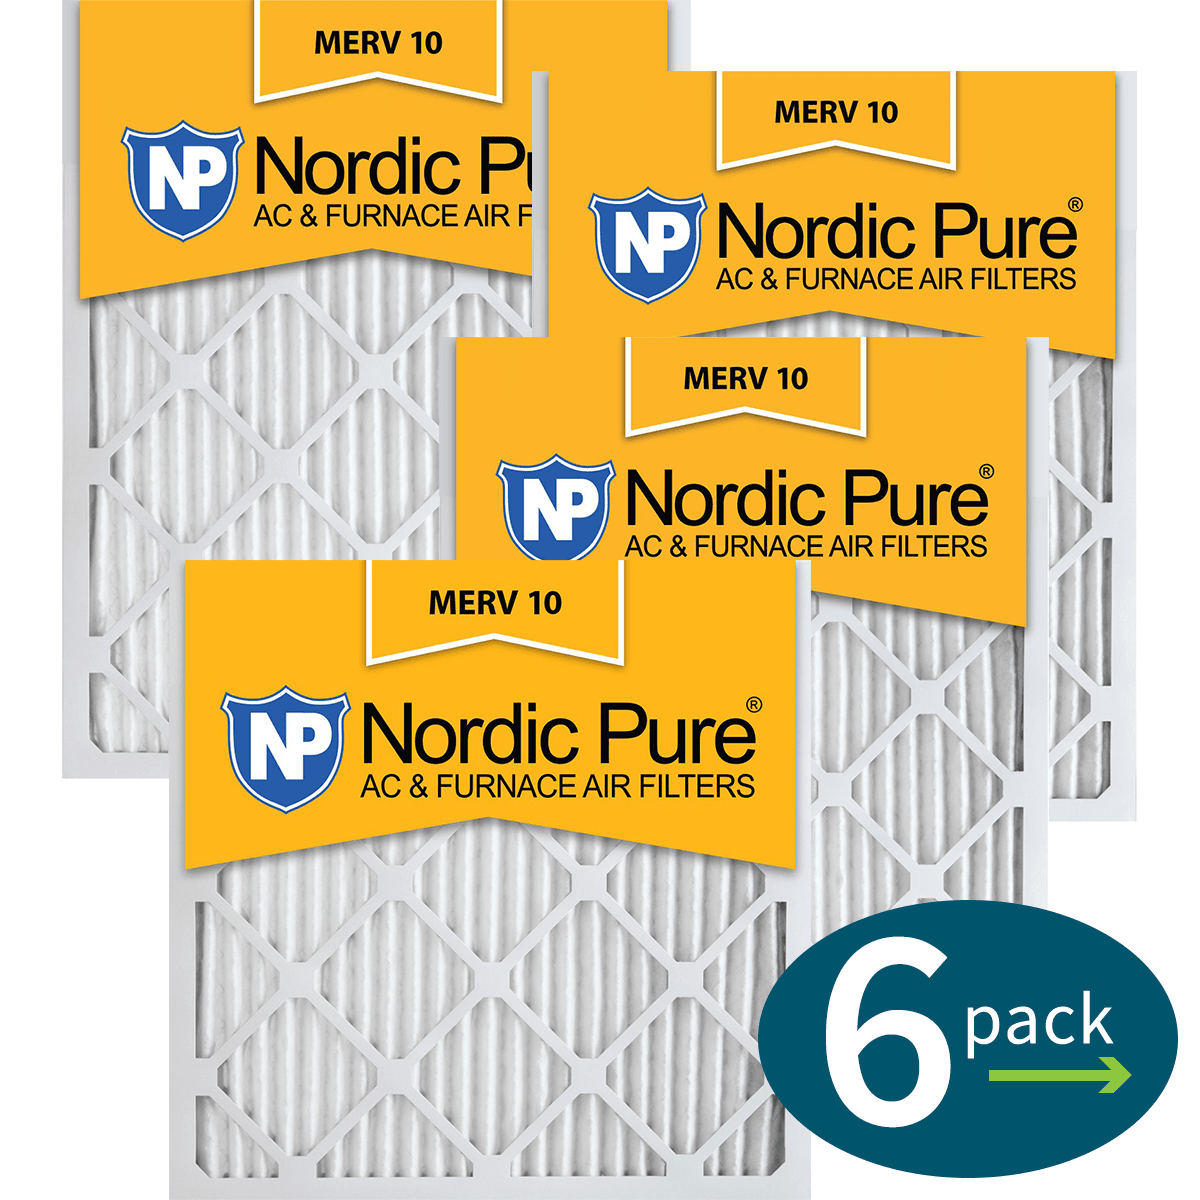 Nordic Pure Merv 10 1-in. Pleated Furnace Filters (6 Pack)